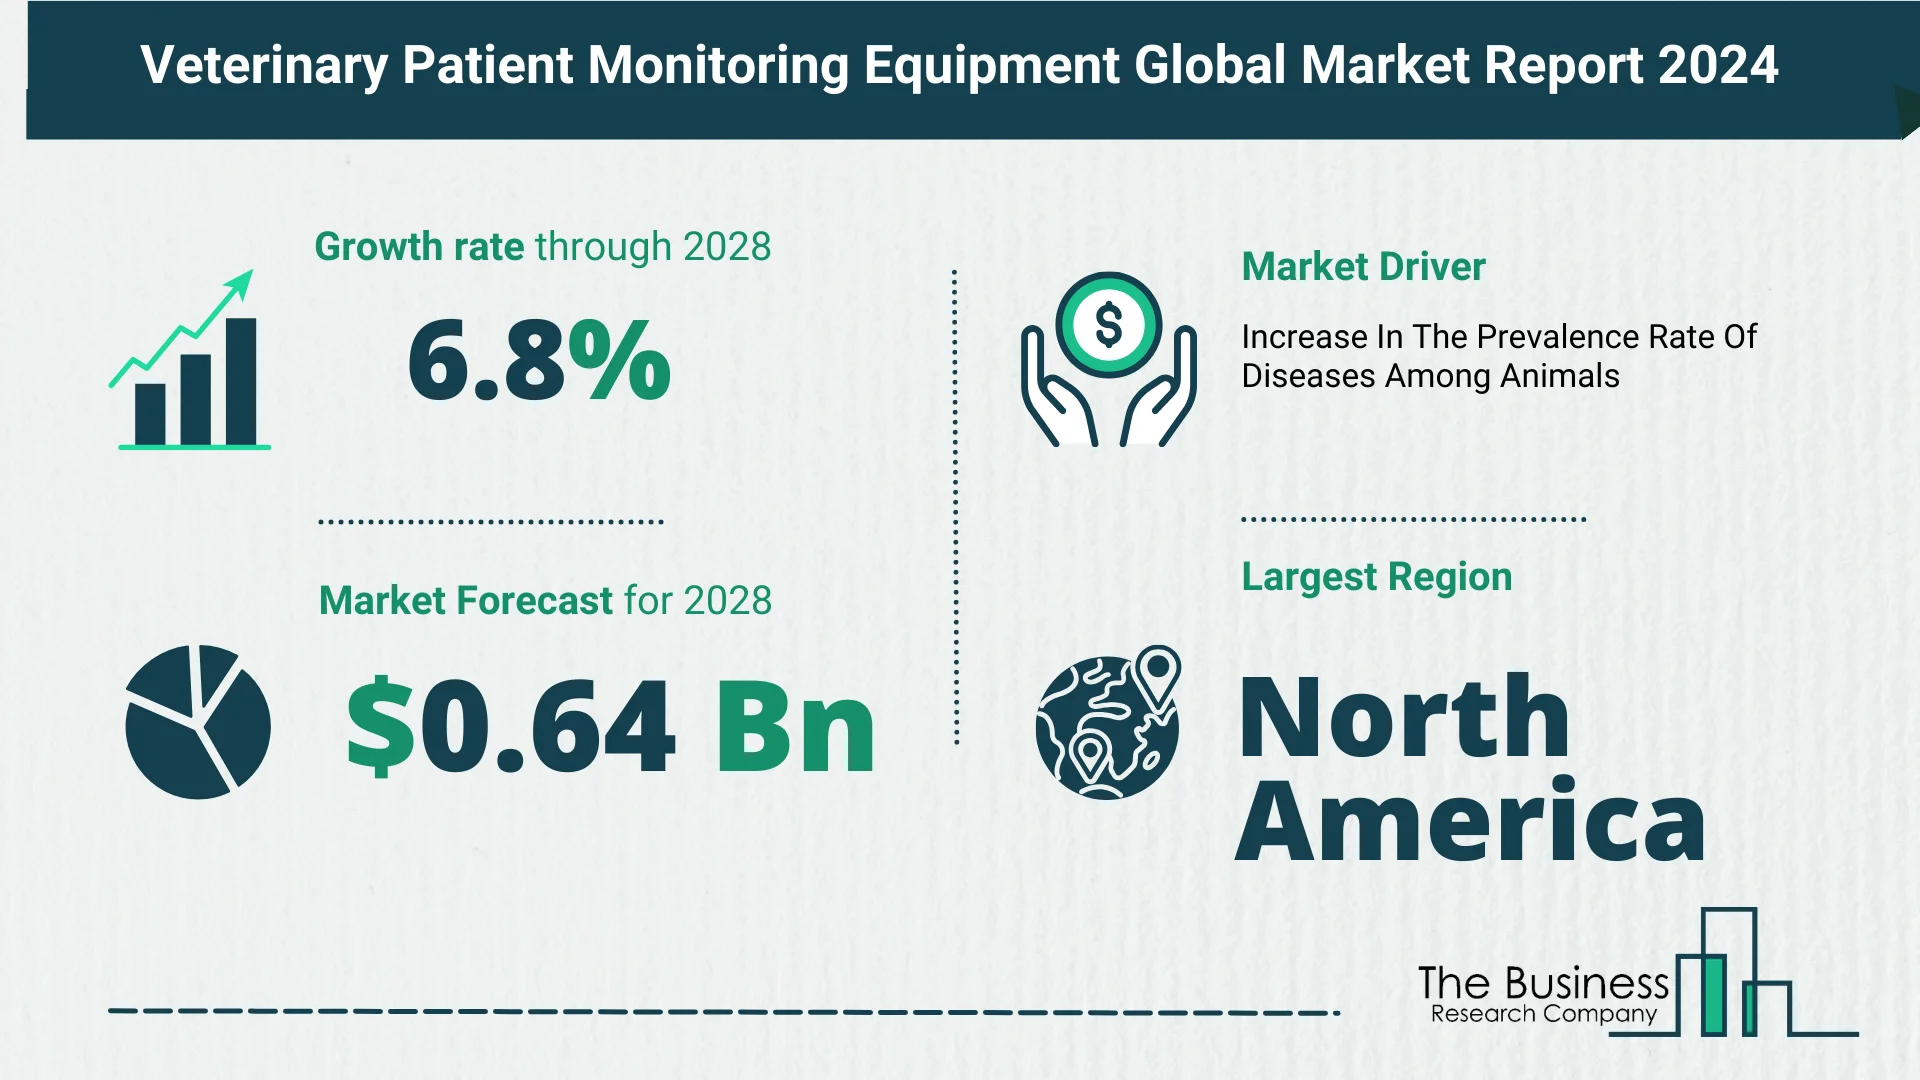 Key Takeaways From The Global Veterinary Patient Monitoring Equipment Market Forecast 2024